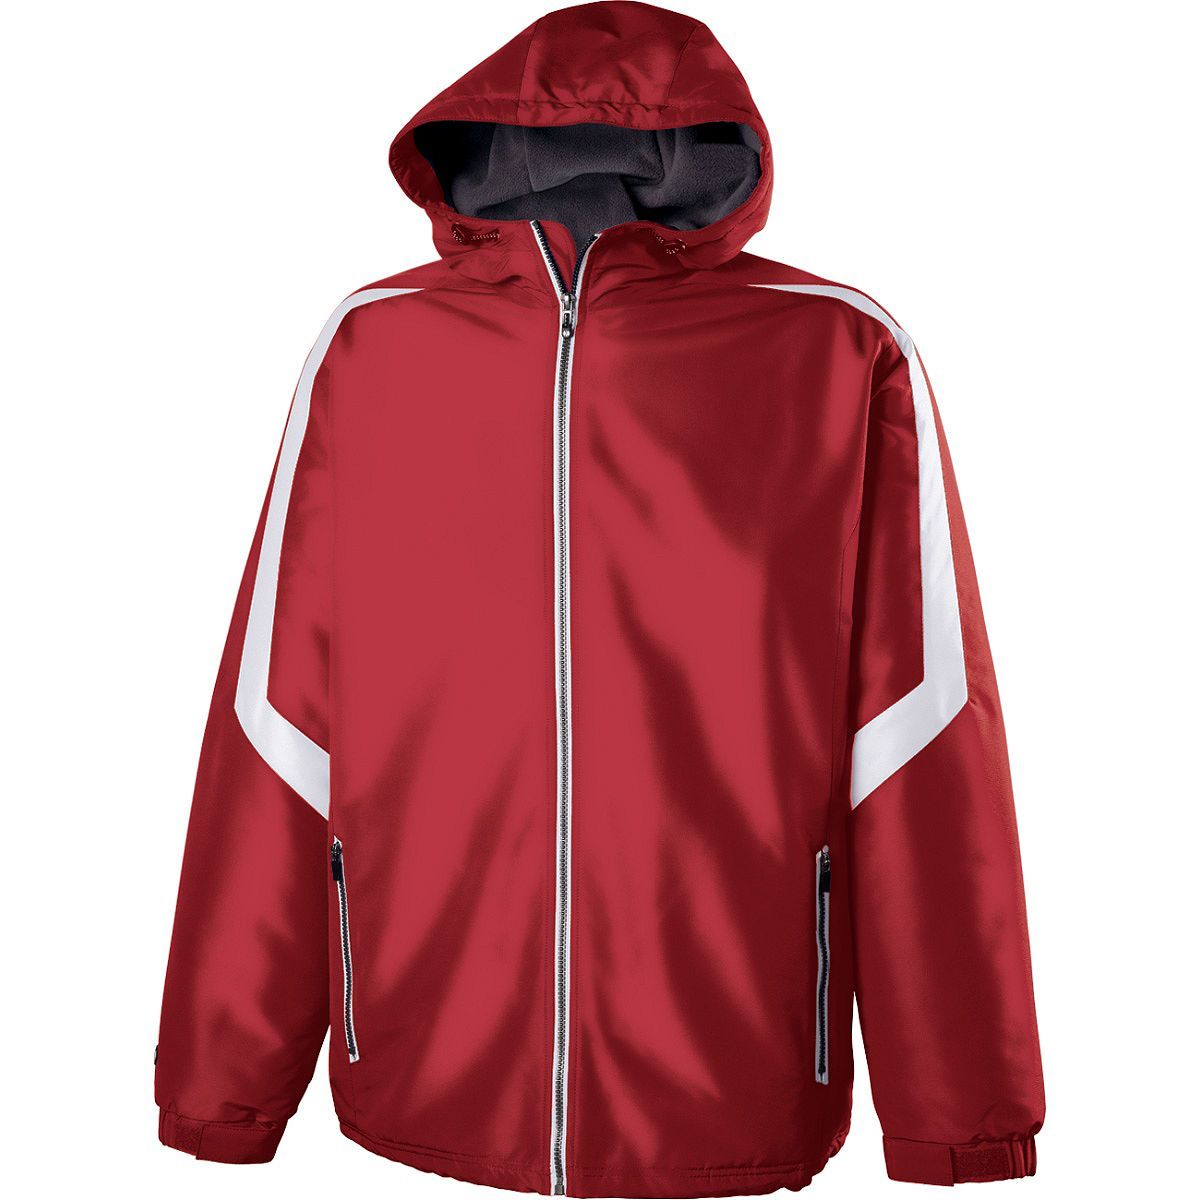 Holloway Sportswear 4XL Charger Jacket Scarlet/White 229059 - image 1 of 4